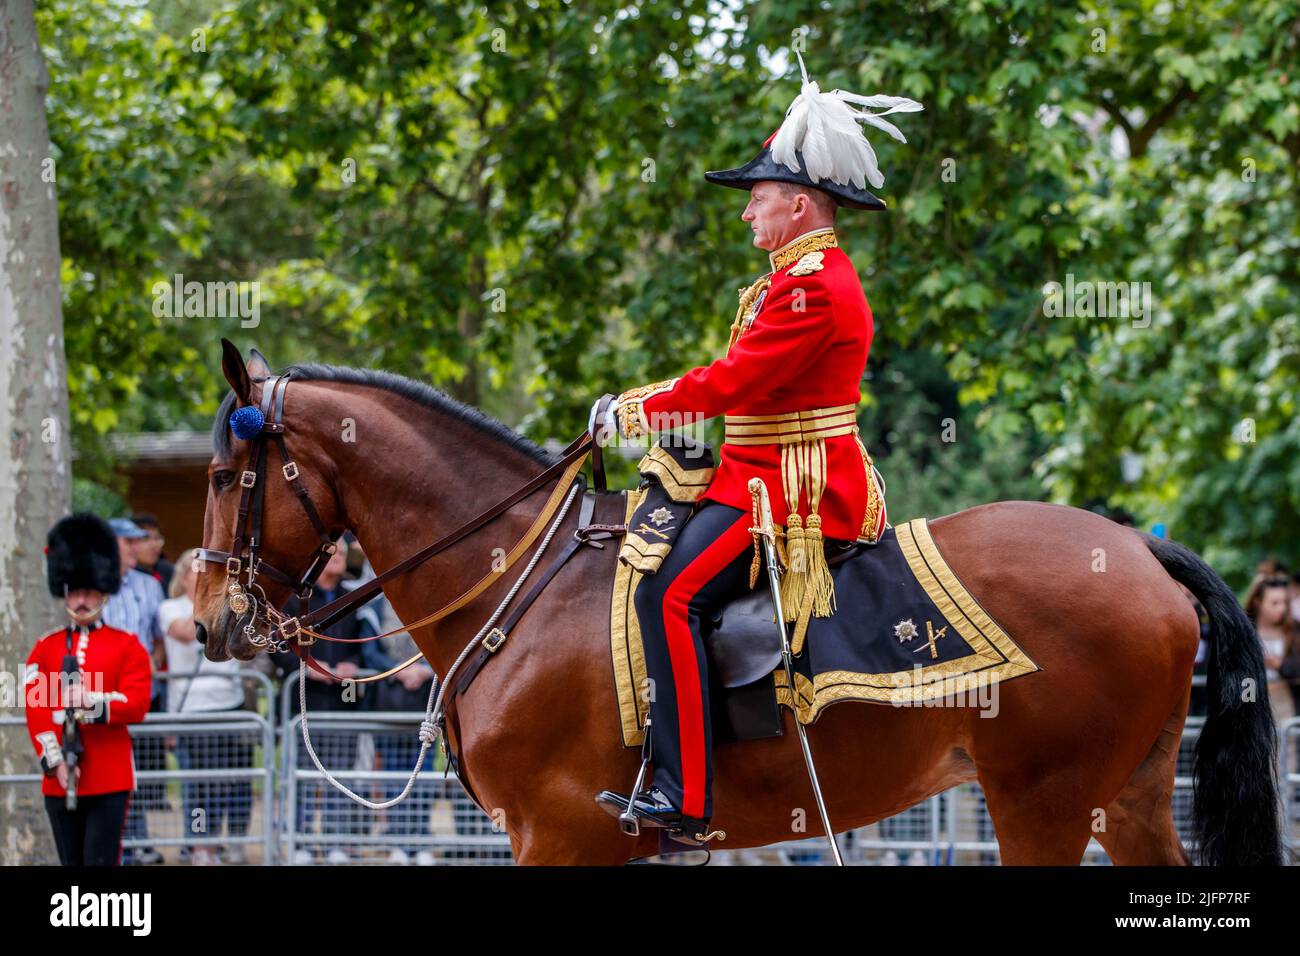 Generalmajor Christopher Chika, Trooping the Color, Colonel’s Review in the Mall, London, England, Großbritannien, am Samstag, den 28. Mai 2022. Stockfoto